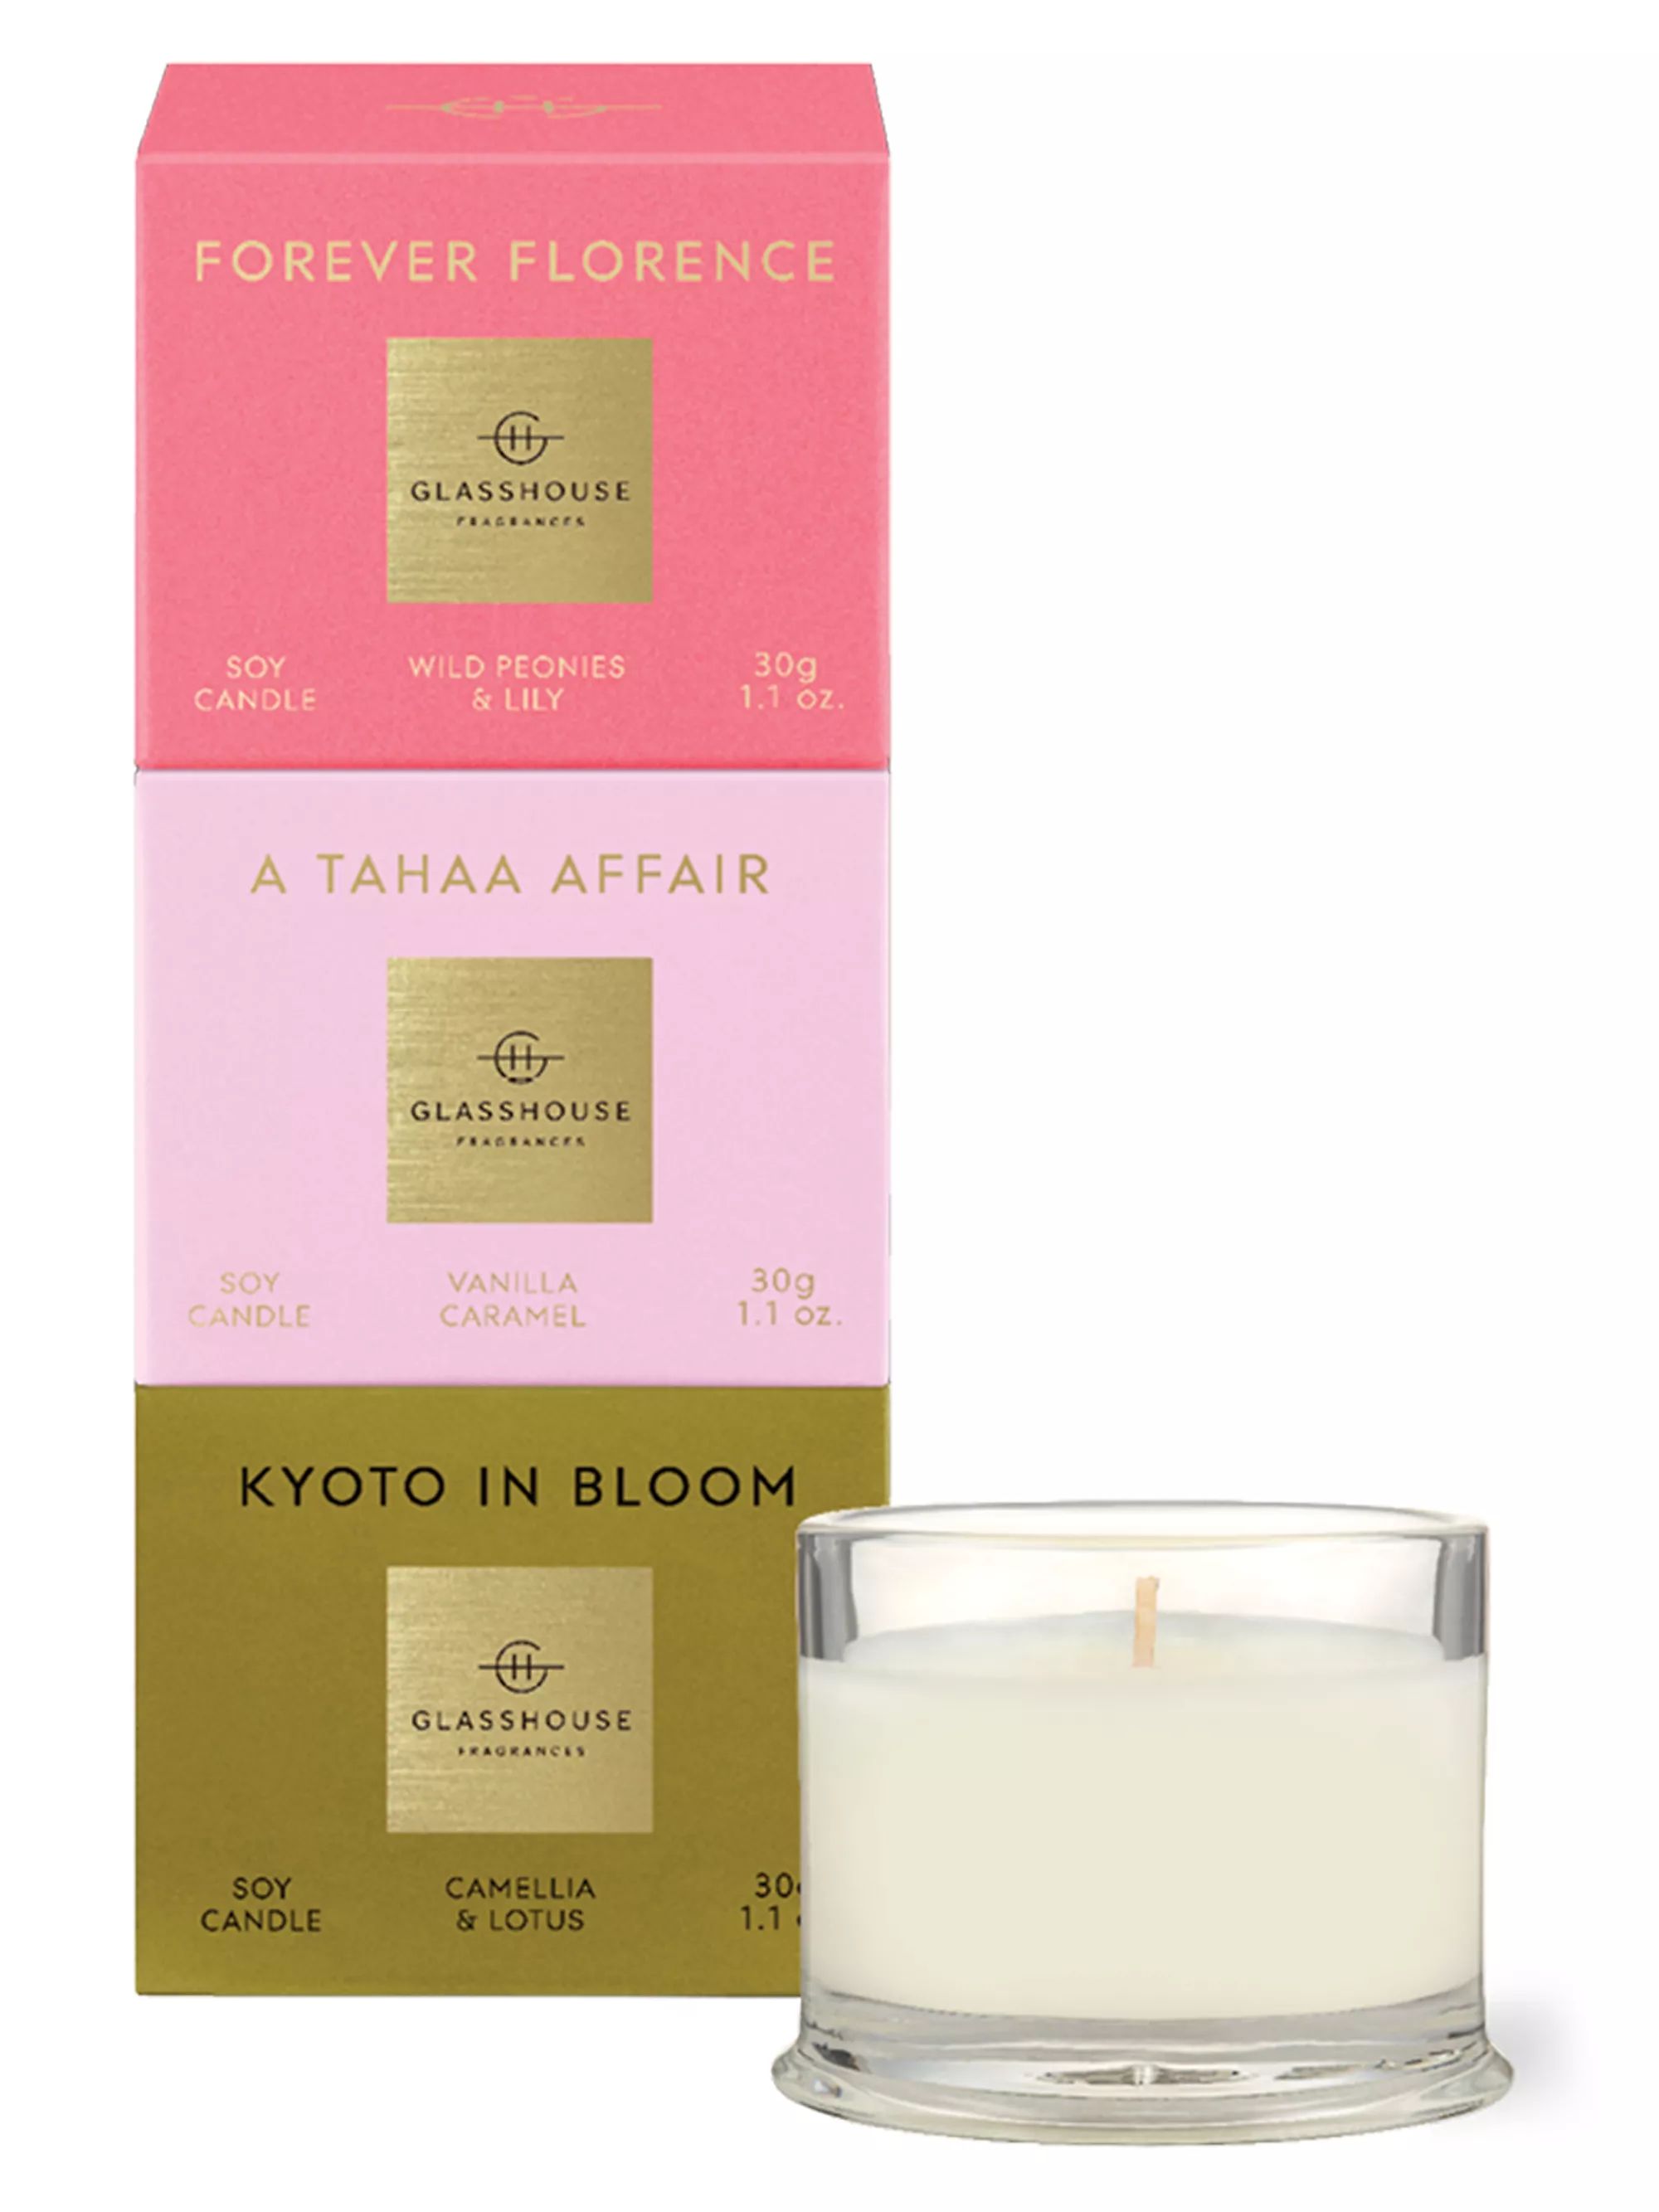 Most Coveted Soy Candle Trio | Saks Fifth Avenue